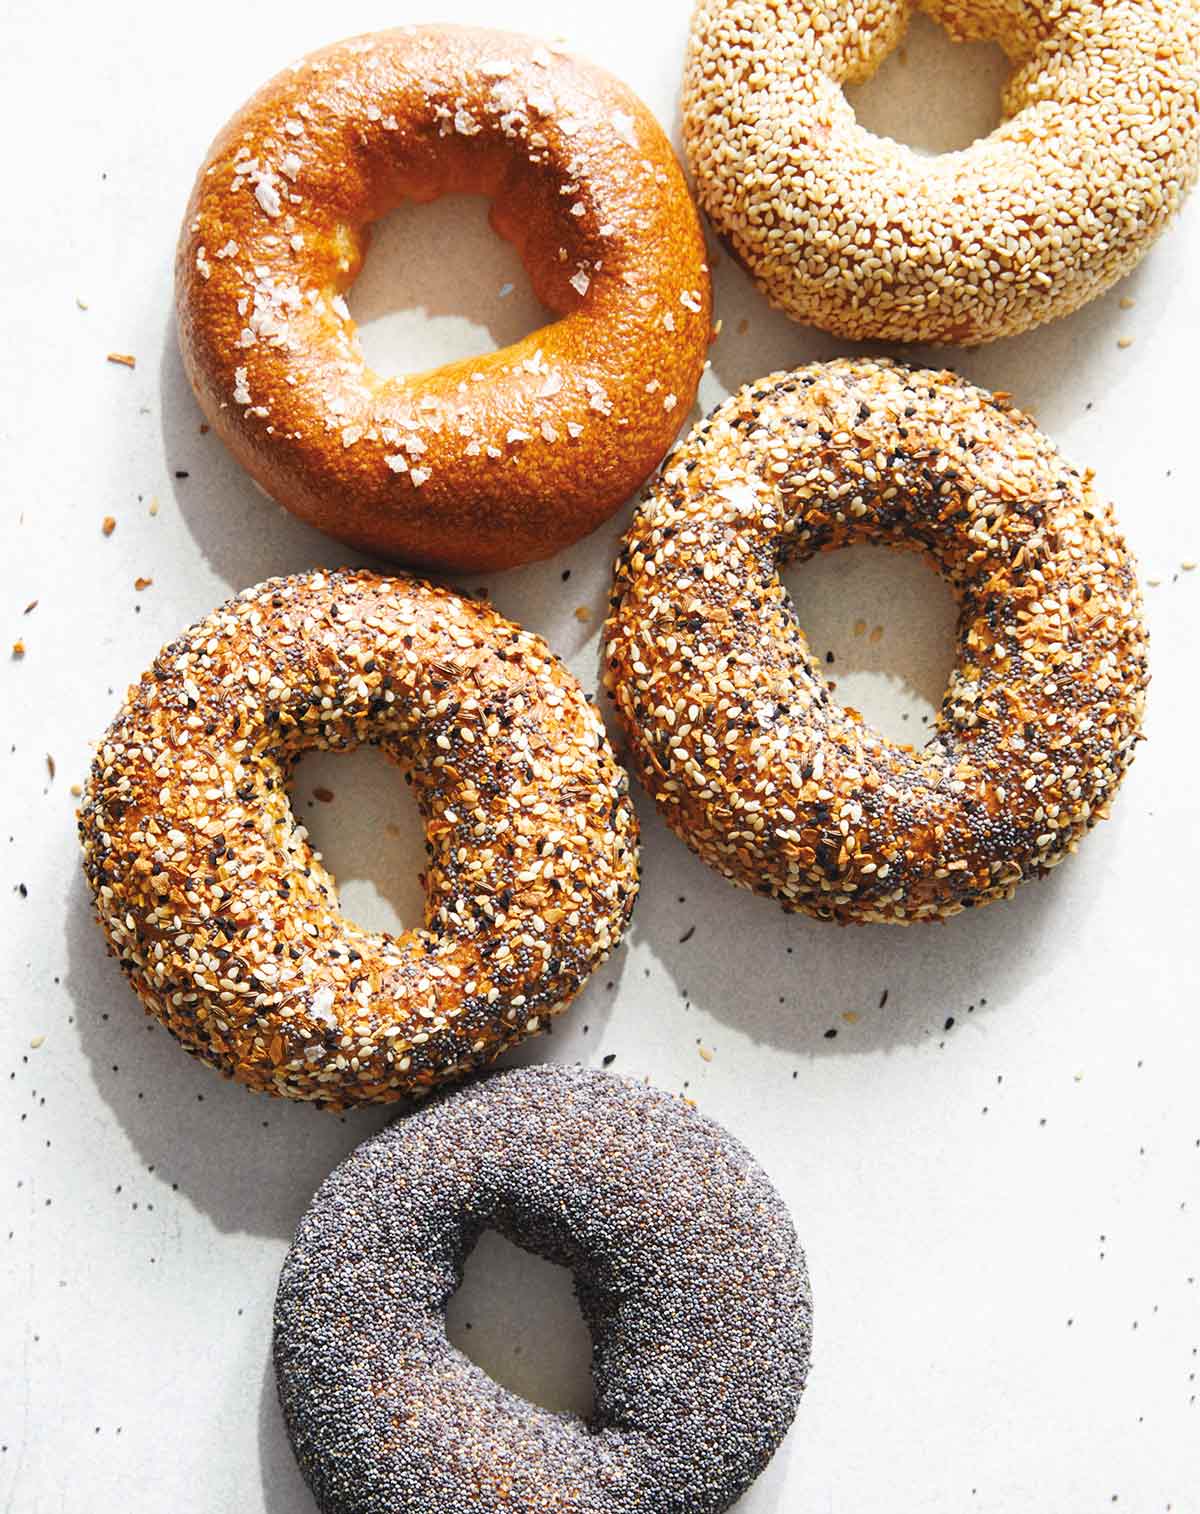 Five rye bagels with assorted toppings on them.